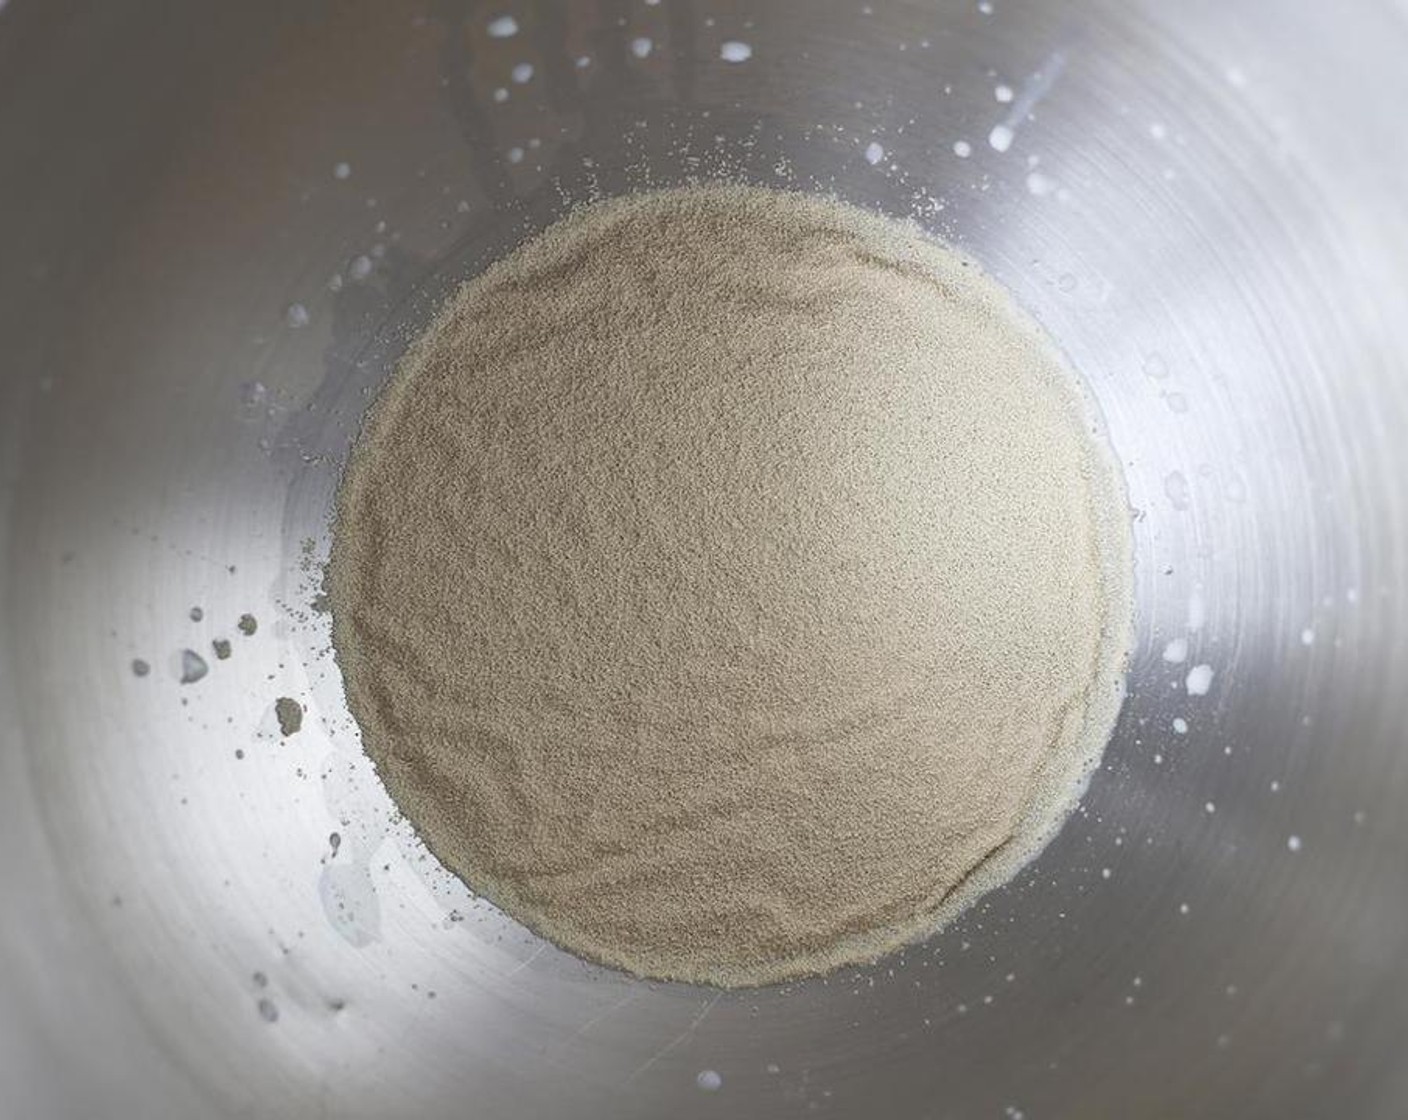 step 3 Sprinkle over the Active Dry Yeast (1/2 Tbsp) and gently stir. Set aside and allow the yeast to activate, around 5 to 10 minutes.